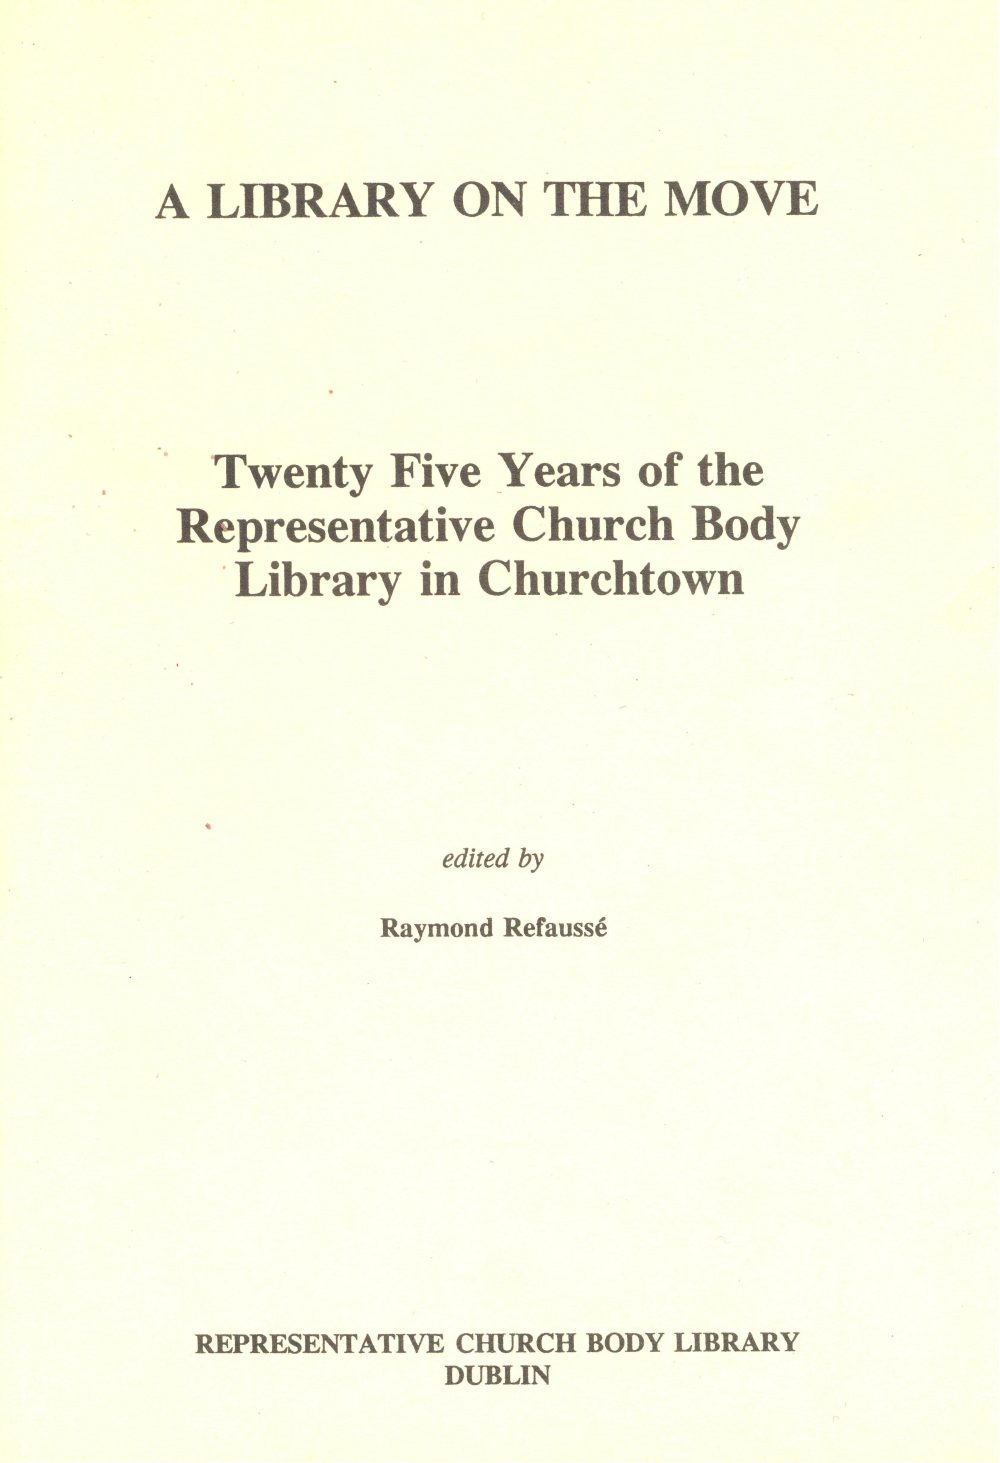 Raymond Refaussé (editor), A Library on the Move: Twenty Five Years of the RCB Library in Churchtown (RCB Library, Dublin, 1970).